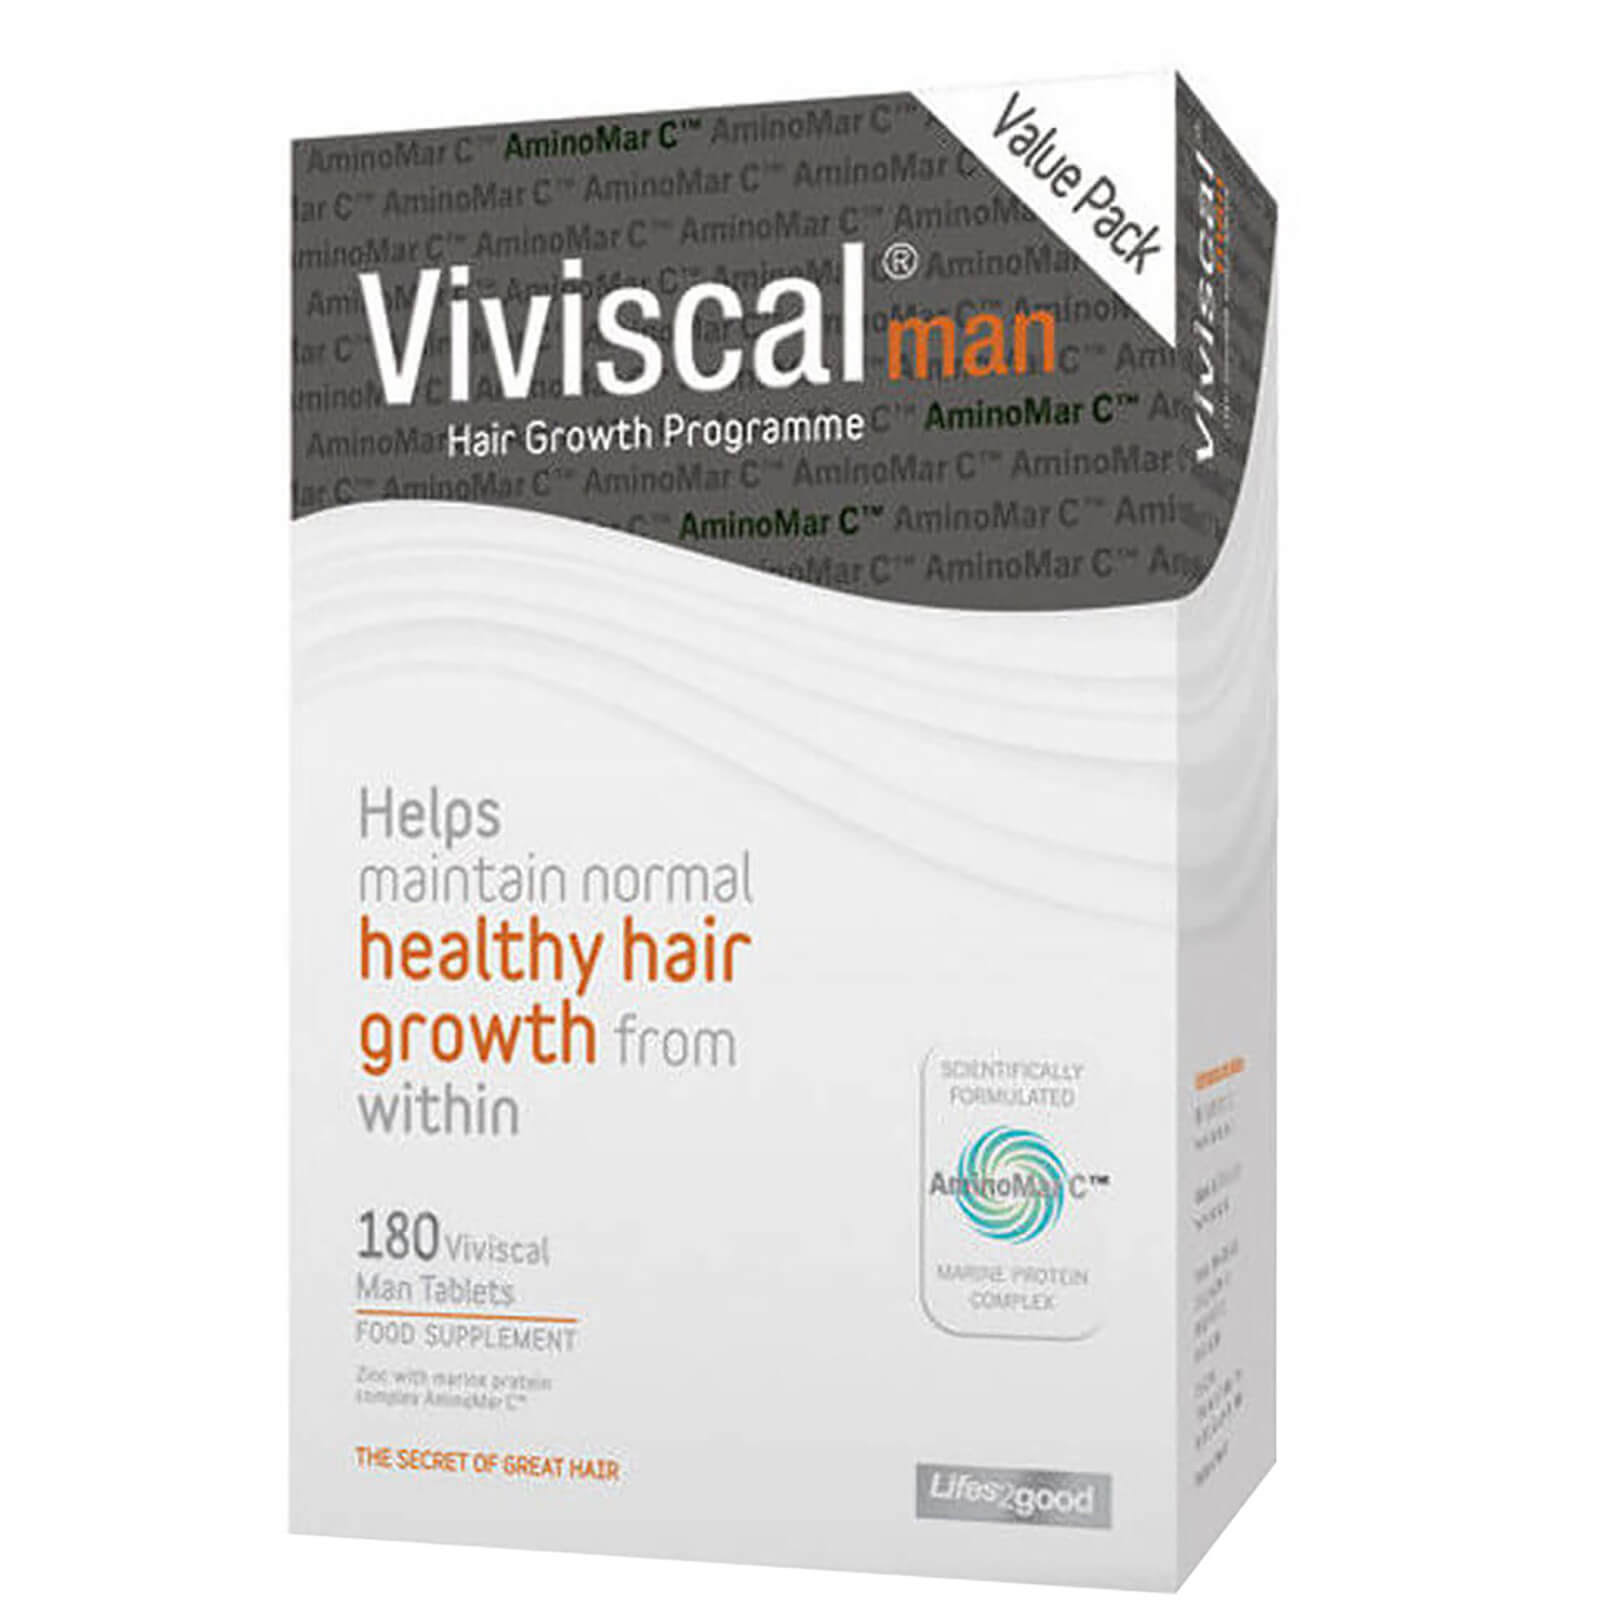 Viviscal Man - Hair Growth Programme, 3 Month Supply (180 Tablets)